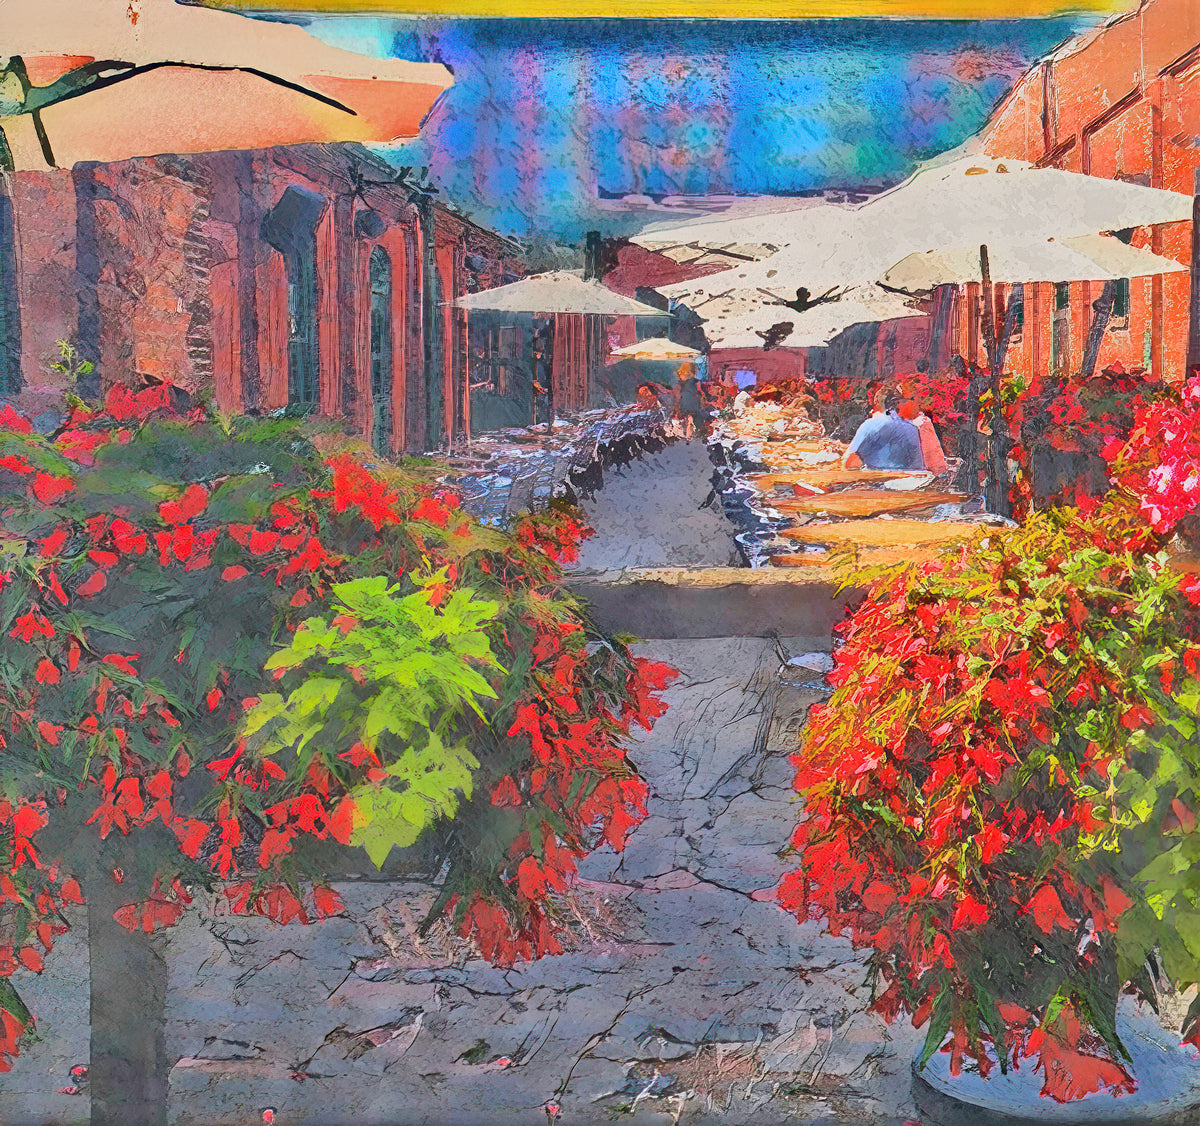 Vibrant Alleyway Cafe with Blooming Flowers by Le Boulanger - Giclee Rolled Canvas Print